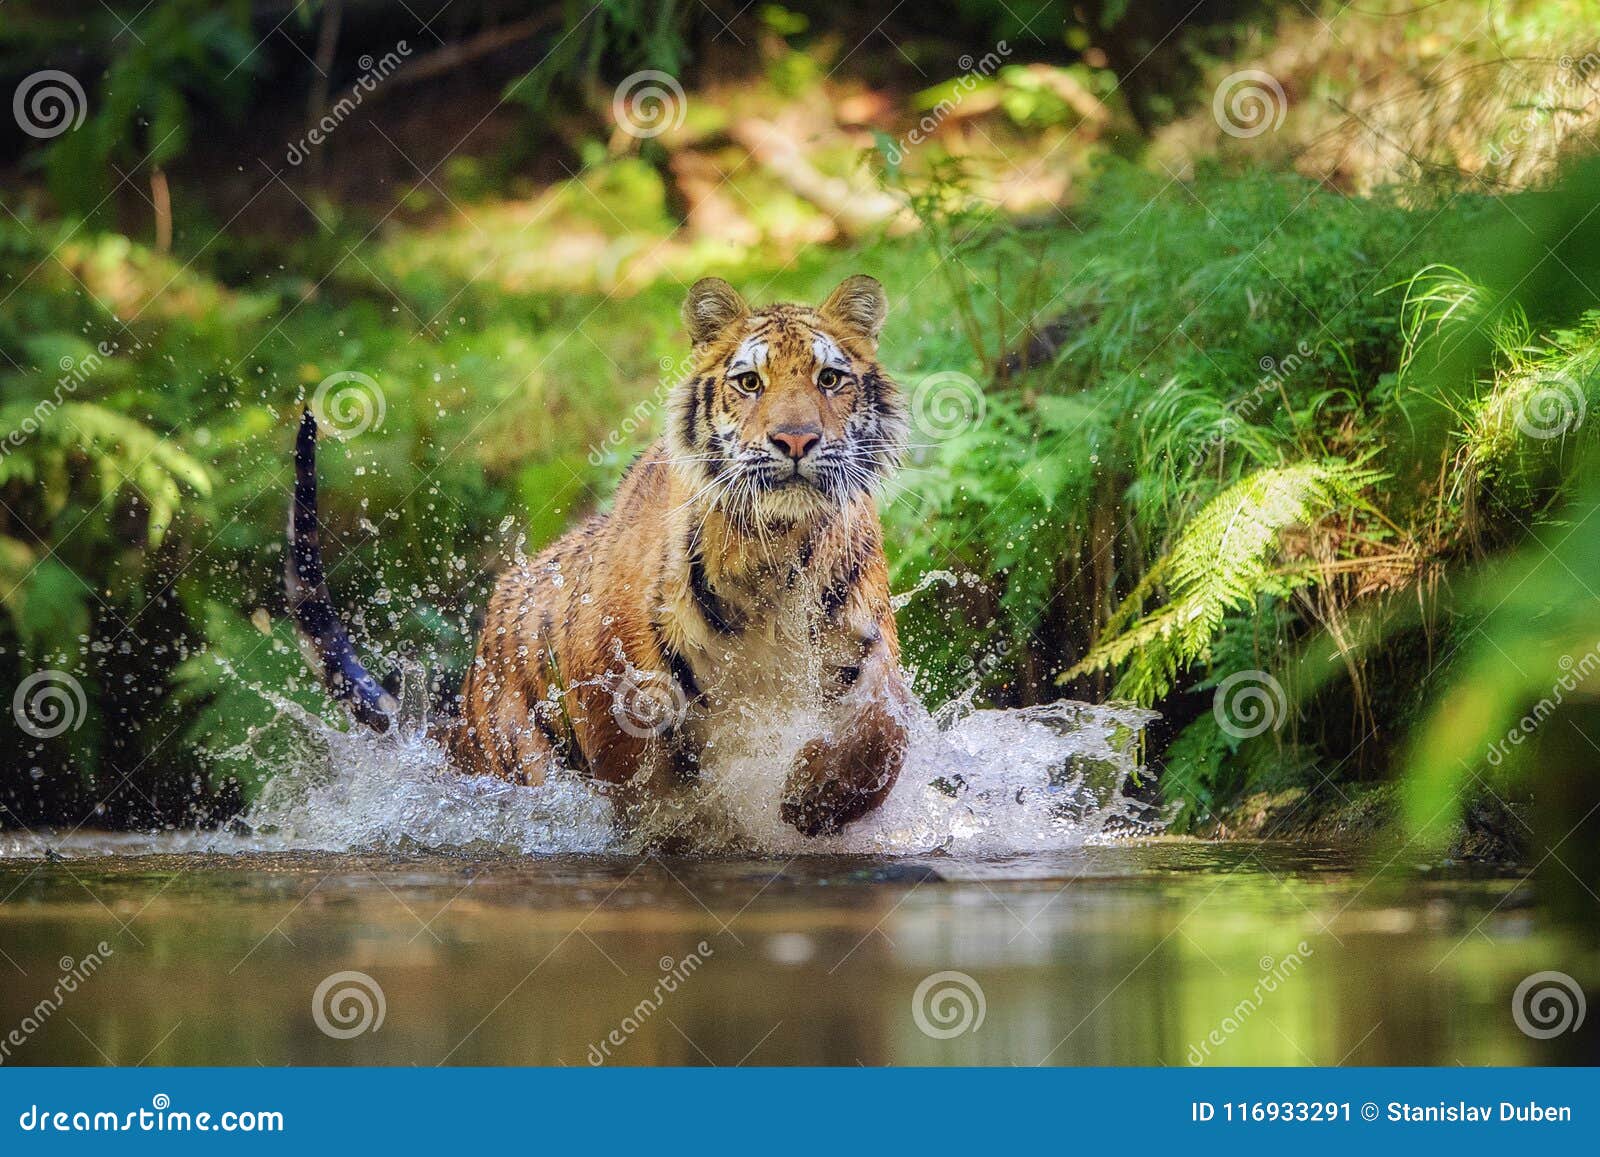 siberian tiger running in the river. tiger with splashing water